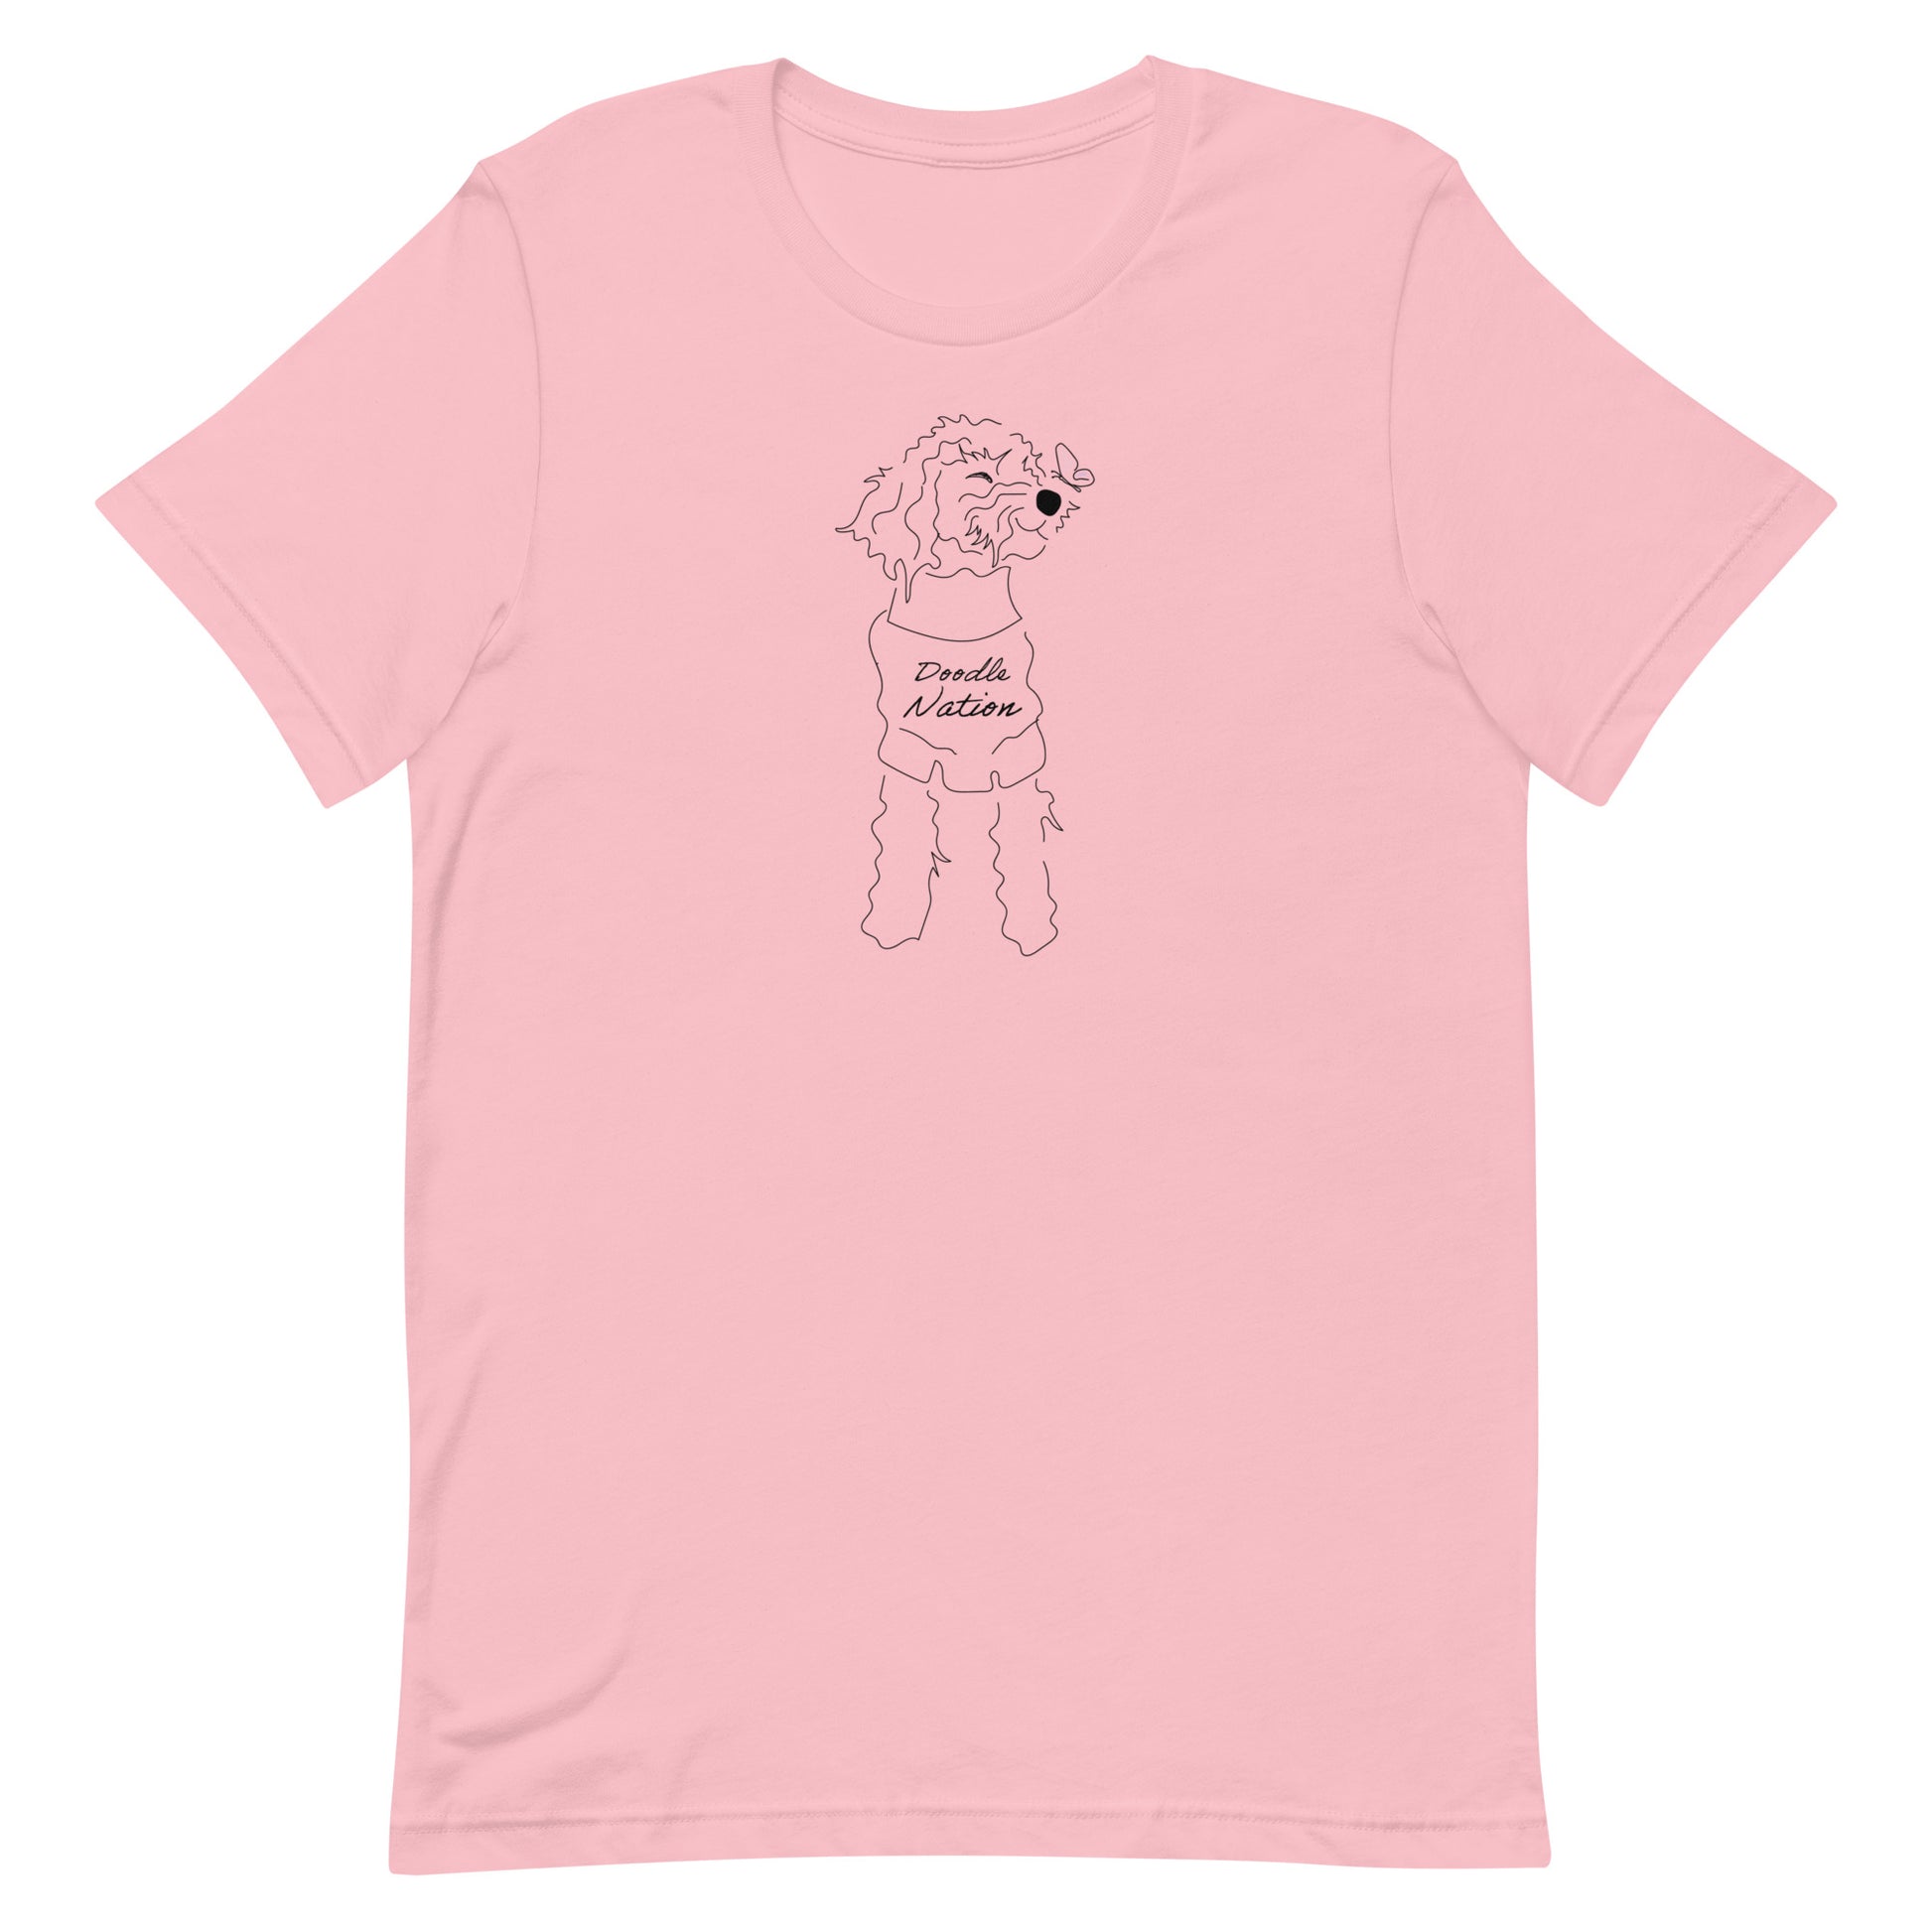 Goldendoodle t-shirt with Goldendoodle dog face and words "Doodle Nation" in  pink color